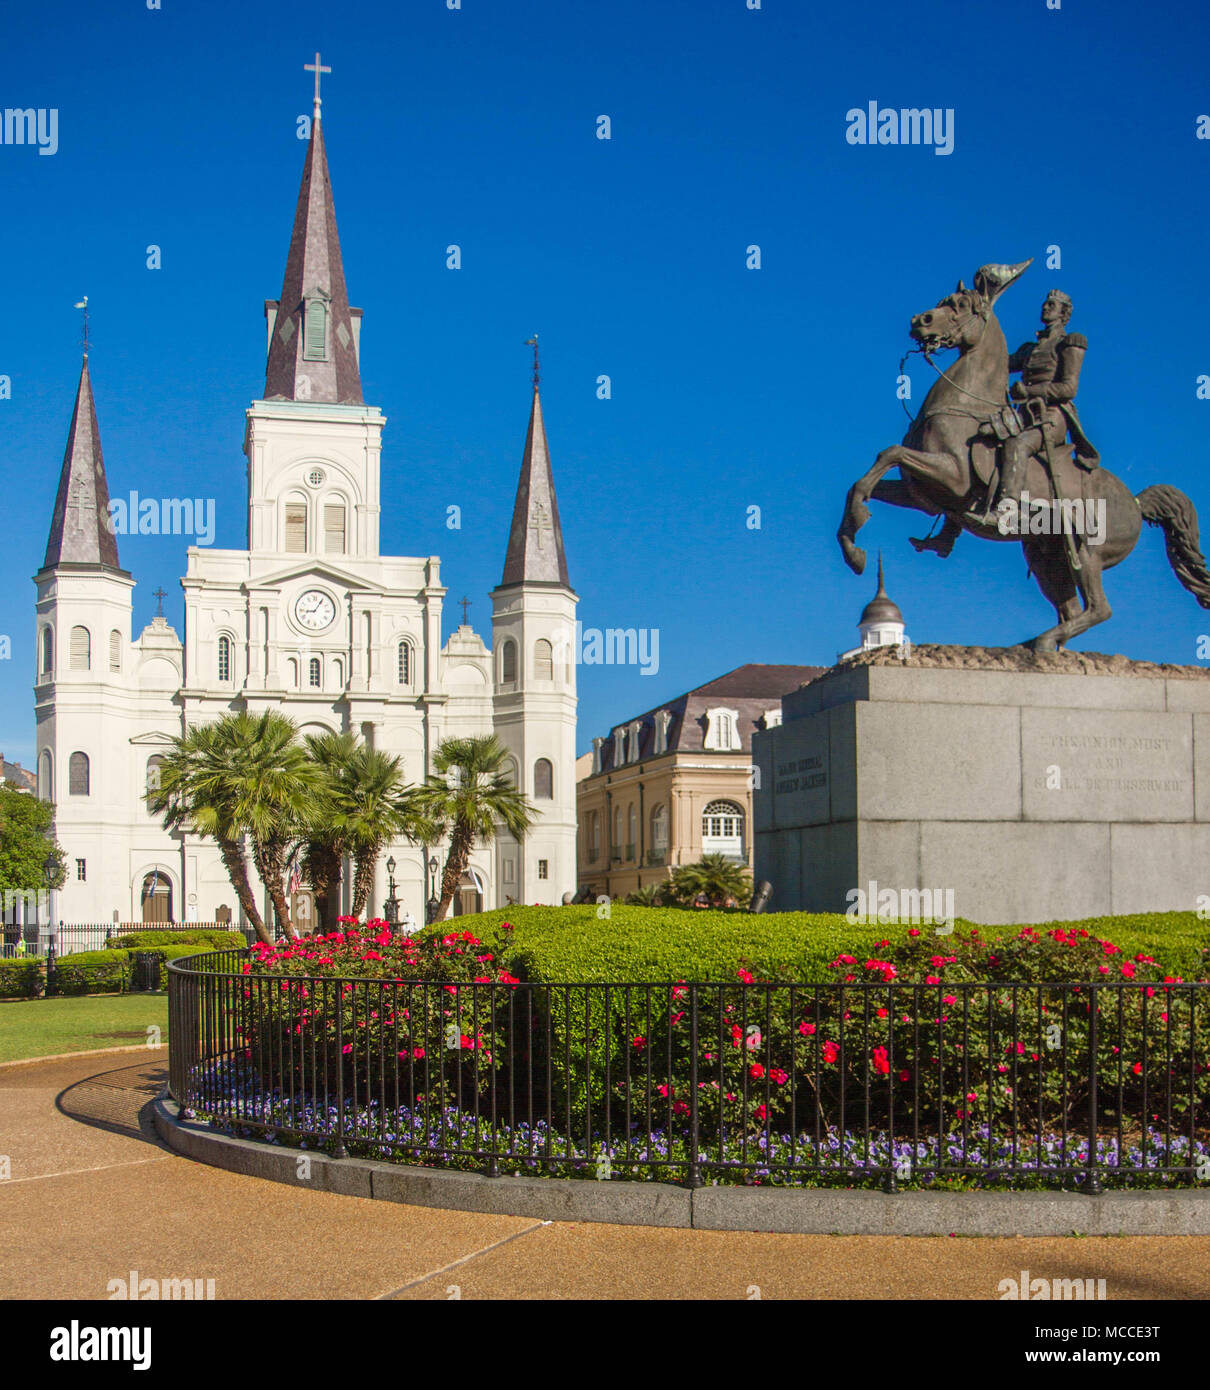 St. Louis Cathedral, Jackson Square, Louisiana, United States. Color vertical image with Andrew Jackson statue in foreground with red flowers. Stock Photo